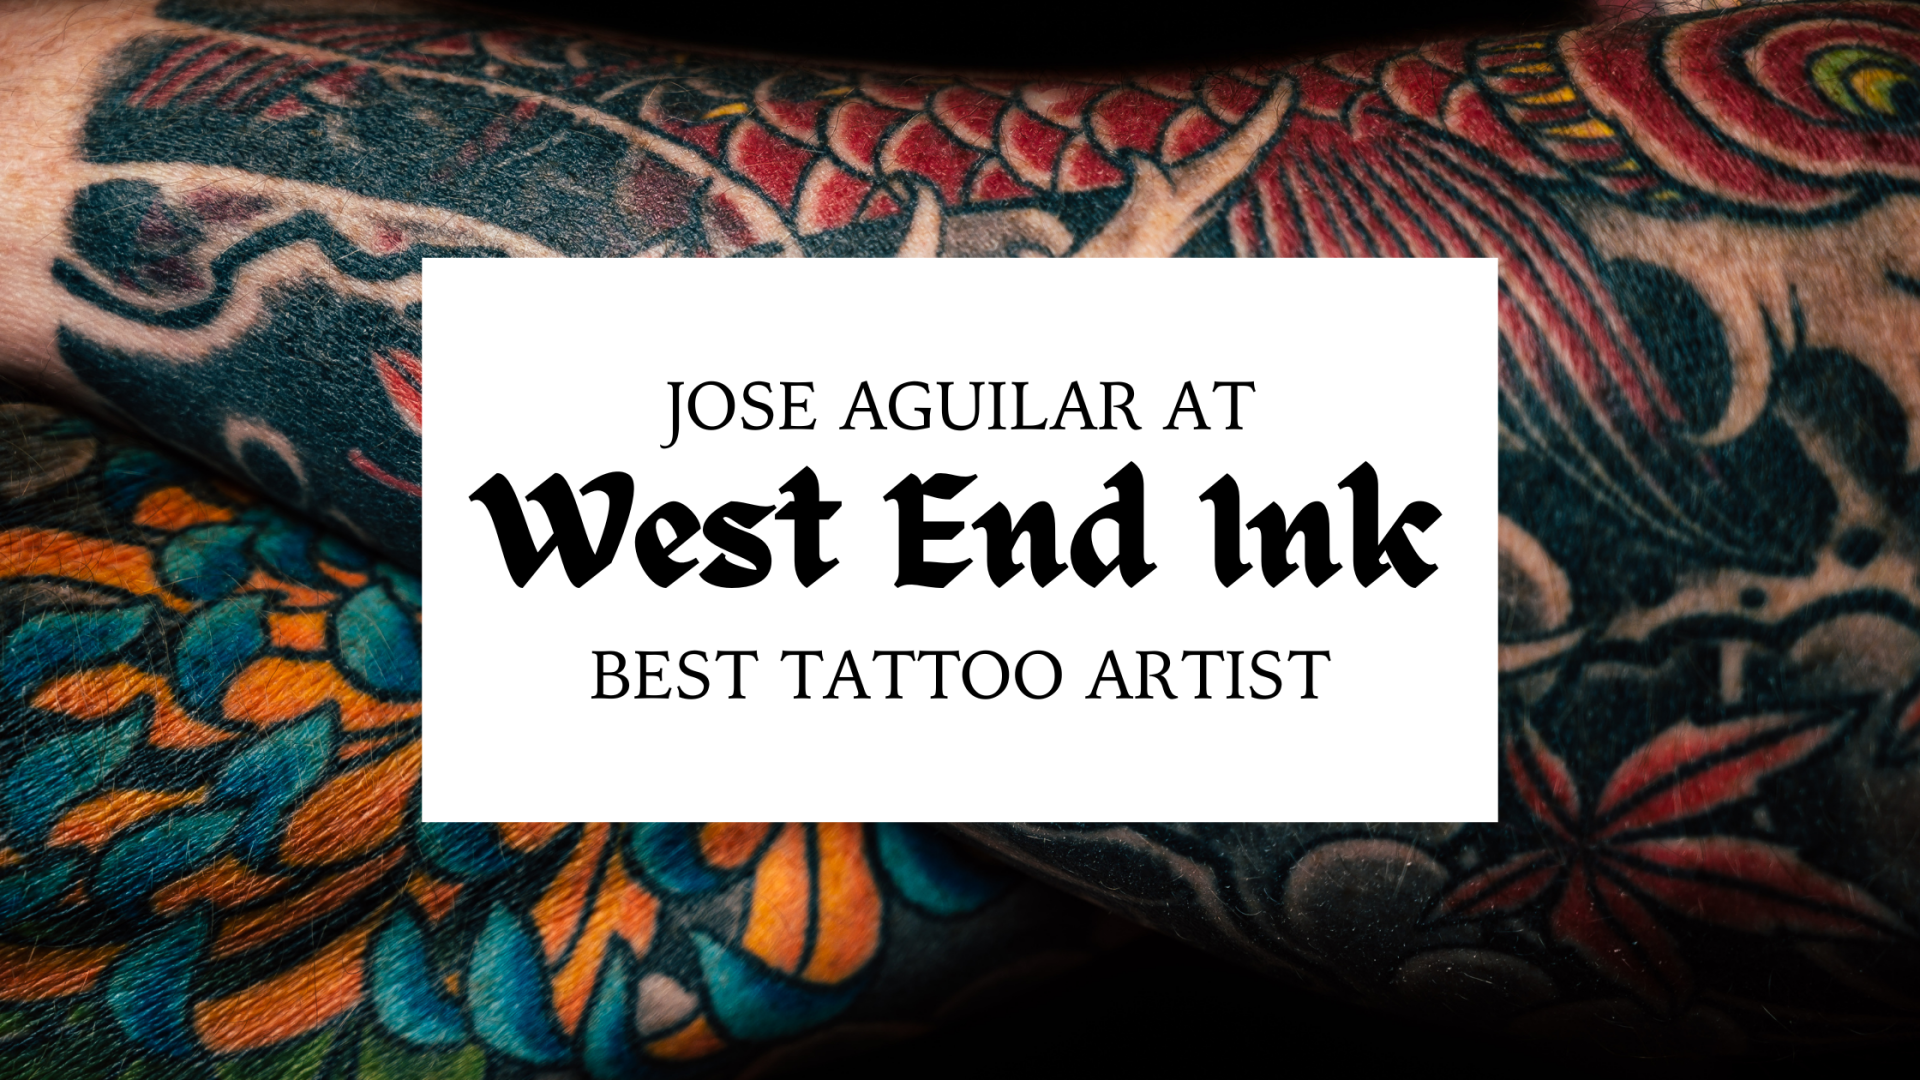 Jose Aguilar with West End Ink is Hamblen Countys best tattoo artist in  Peoples Choice 2022  Special Sections  citizentribunecom